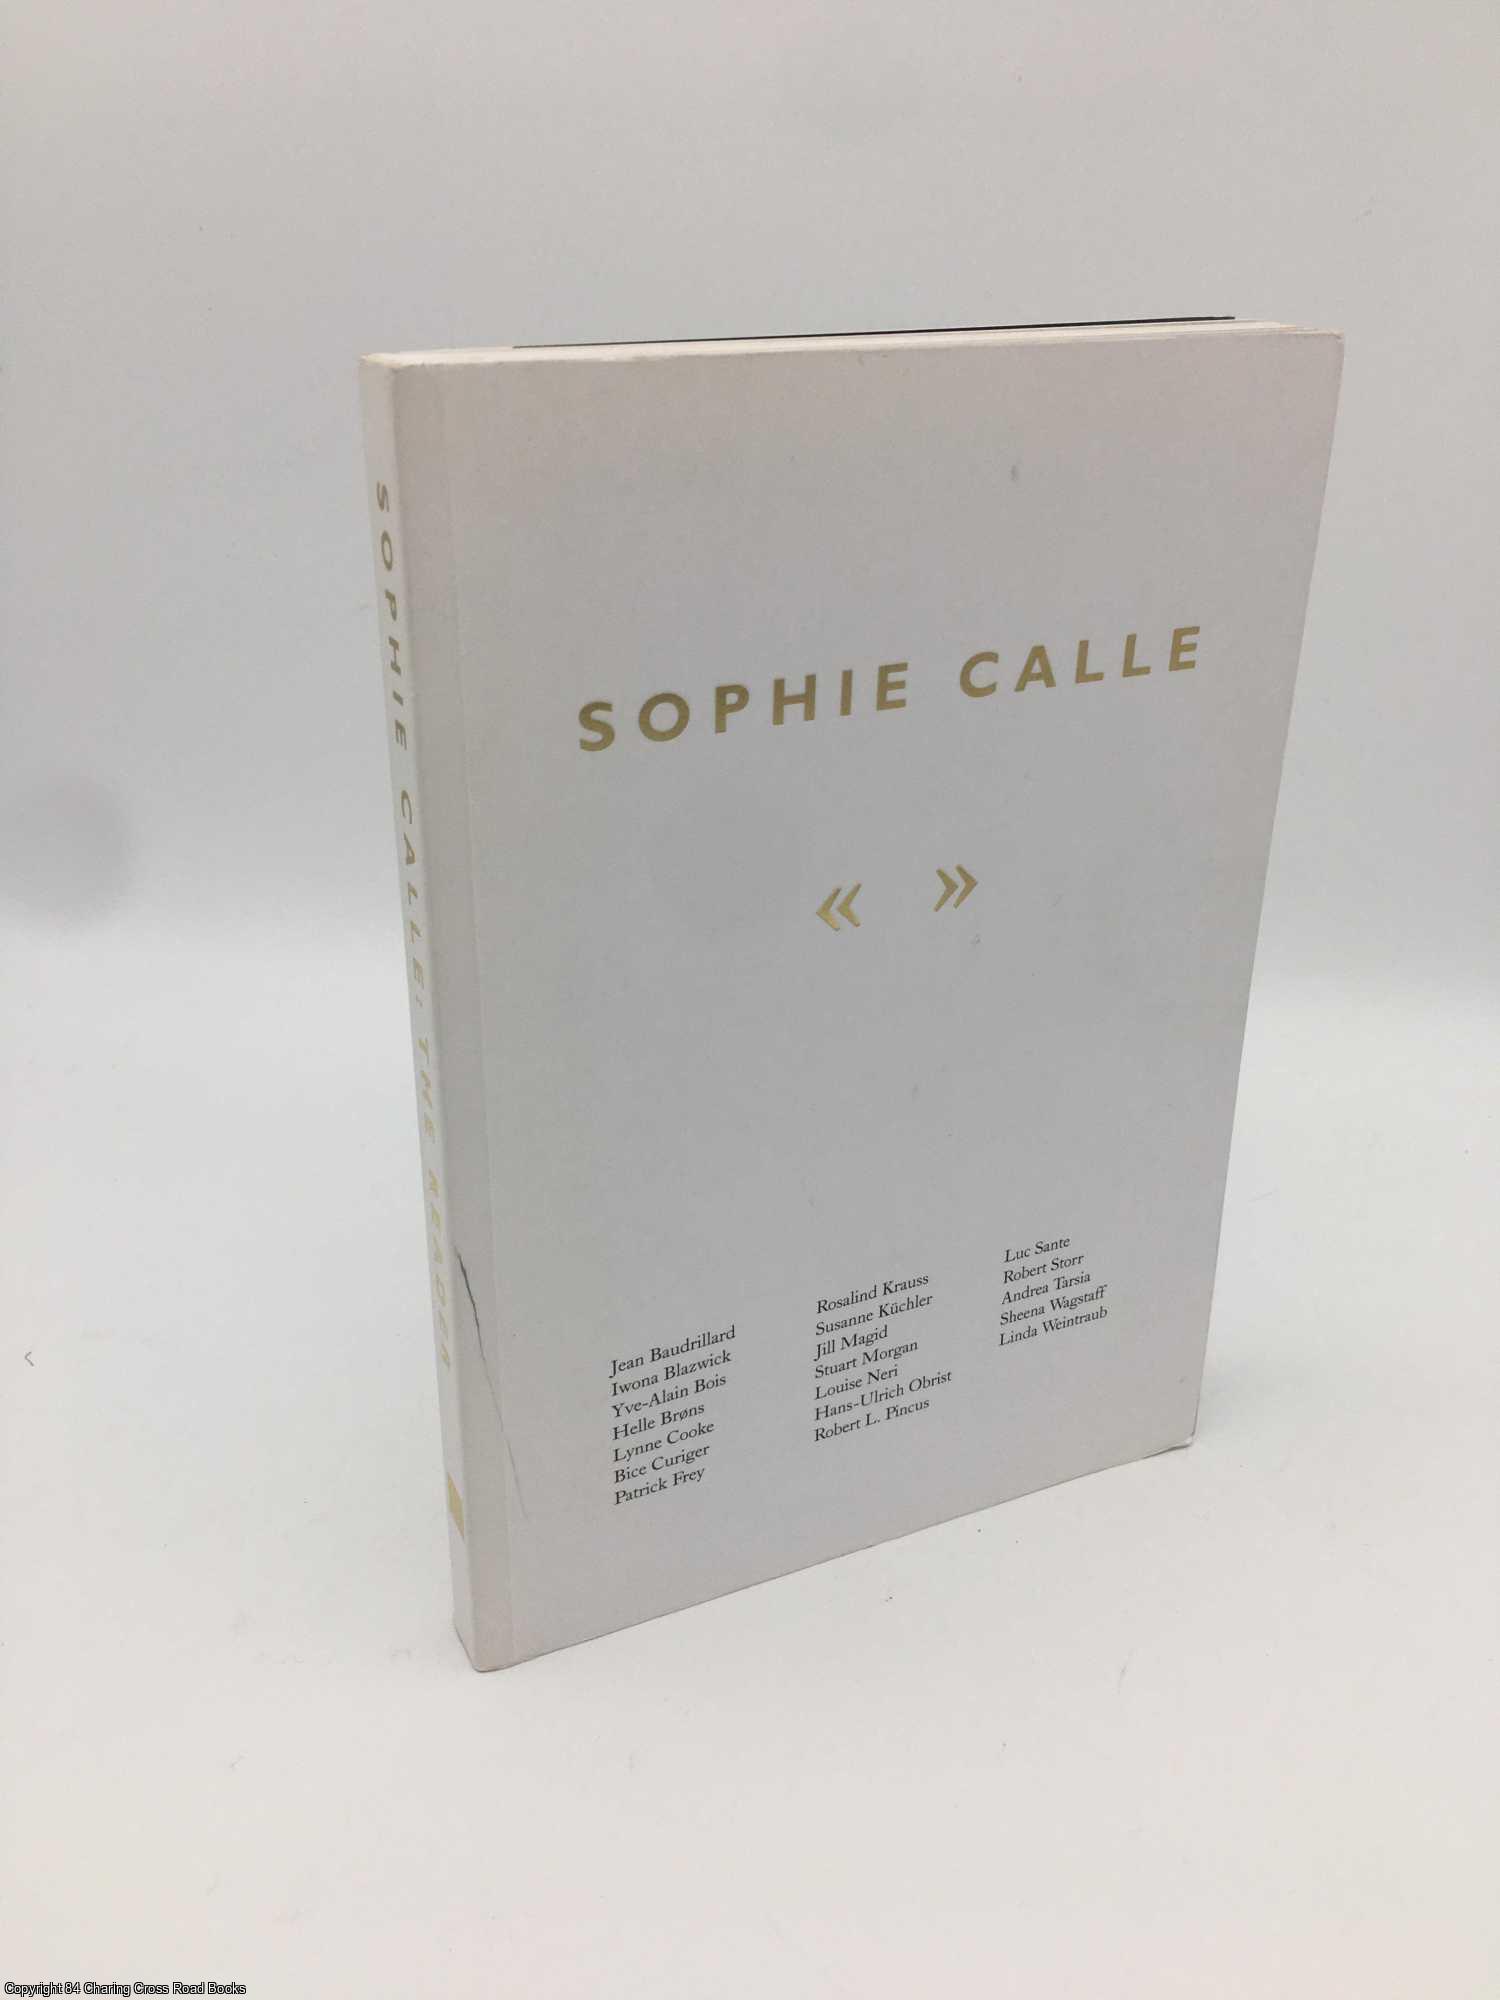 Calle, Sophie - Sophie Calle: The Reader